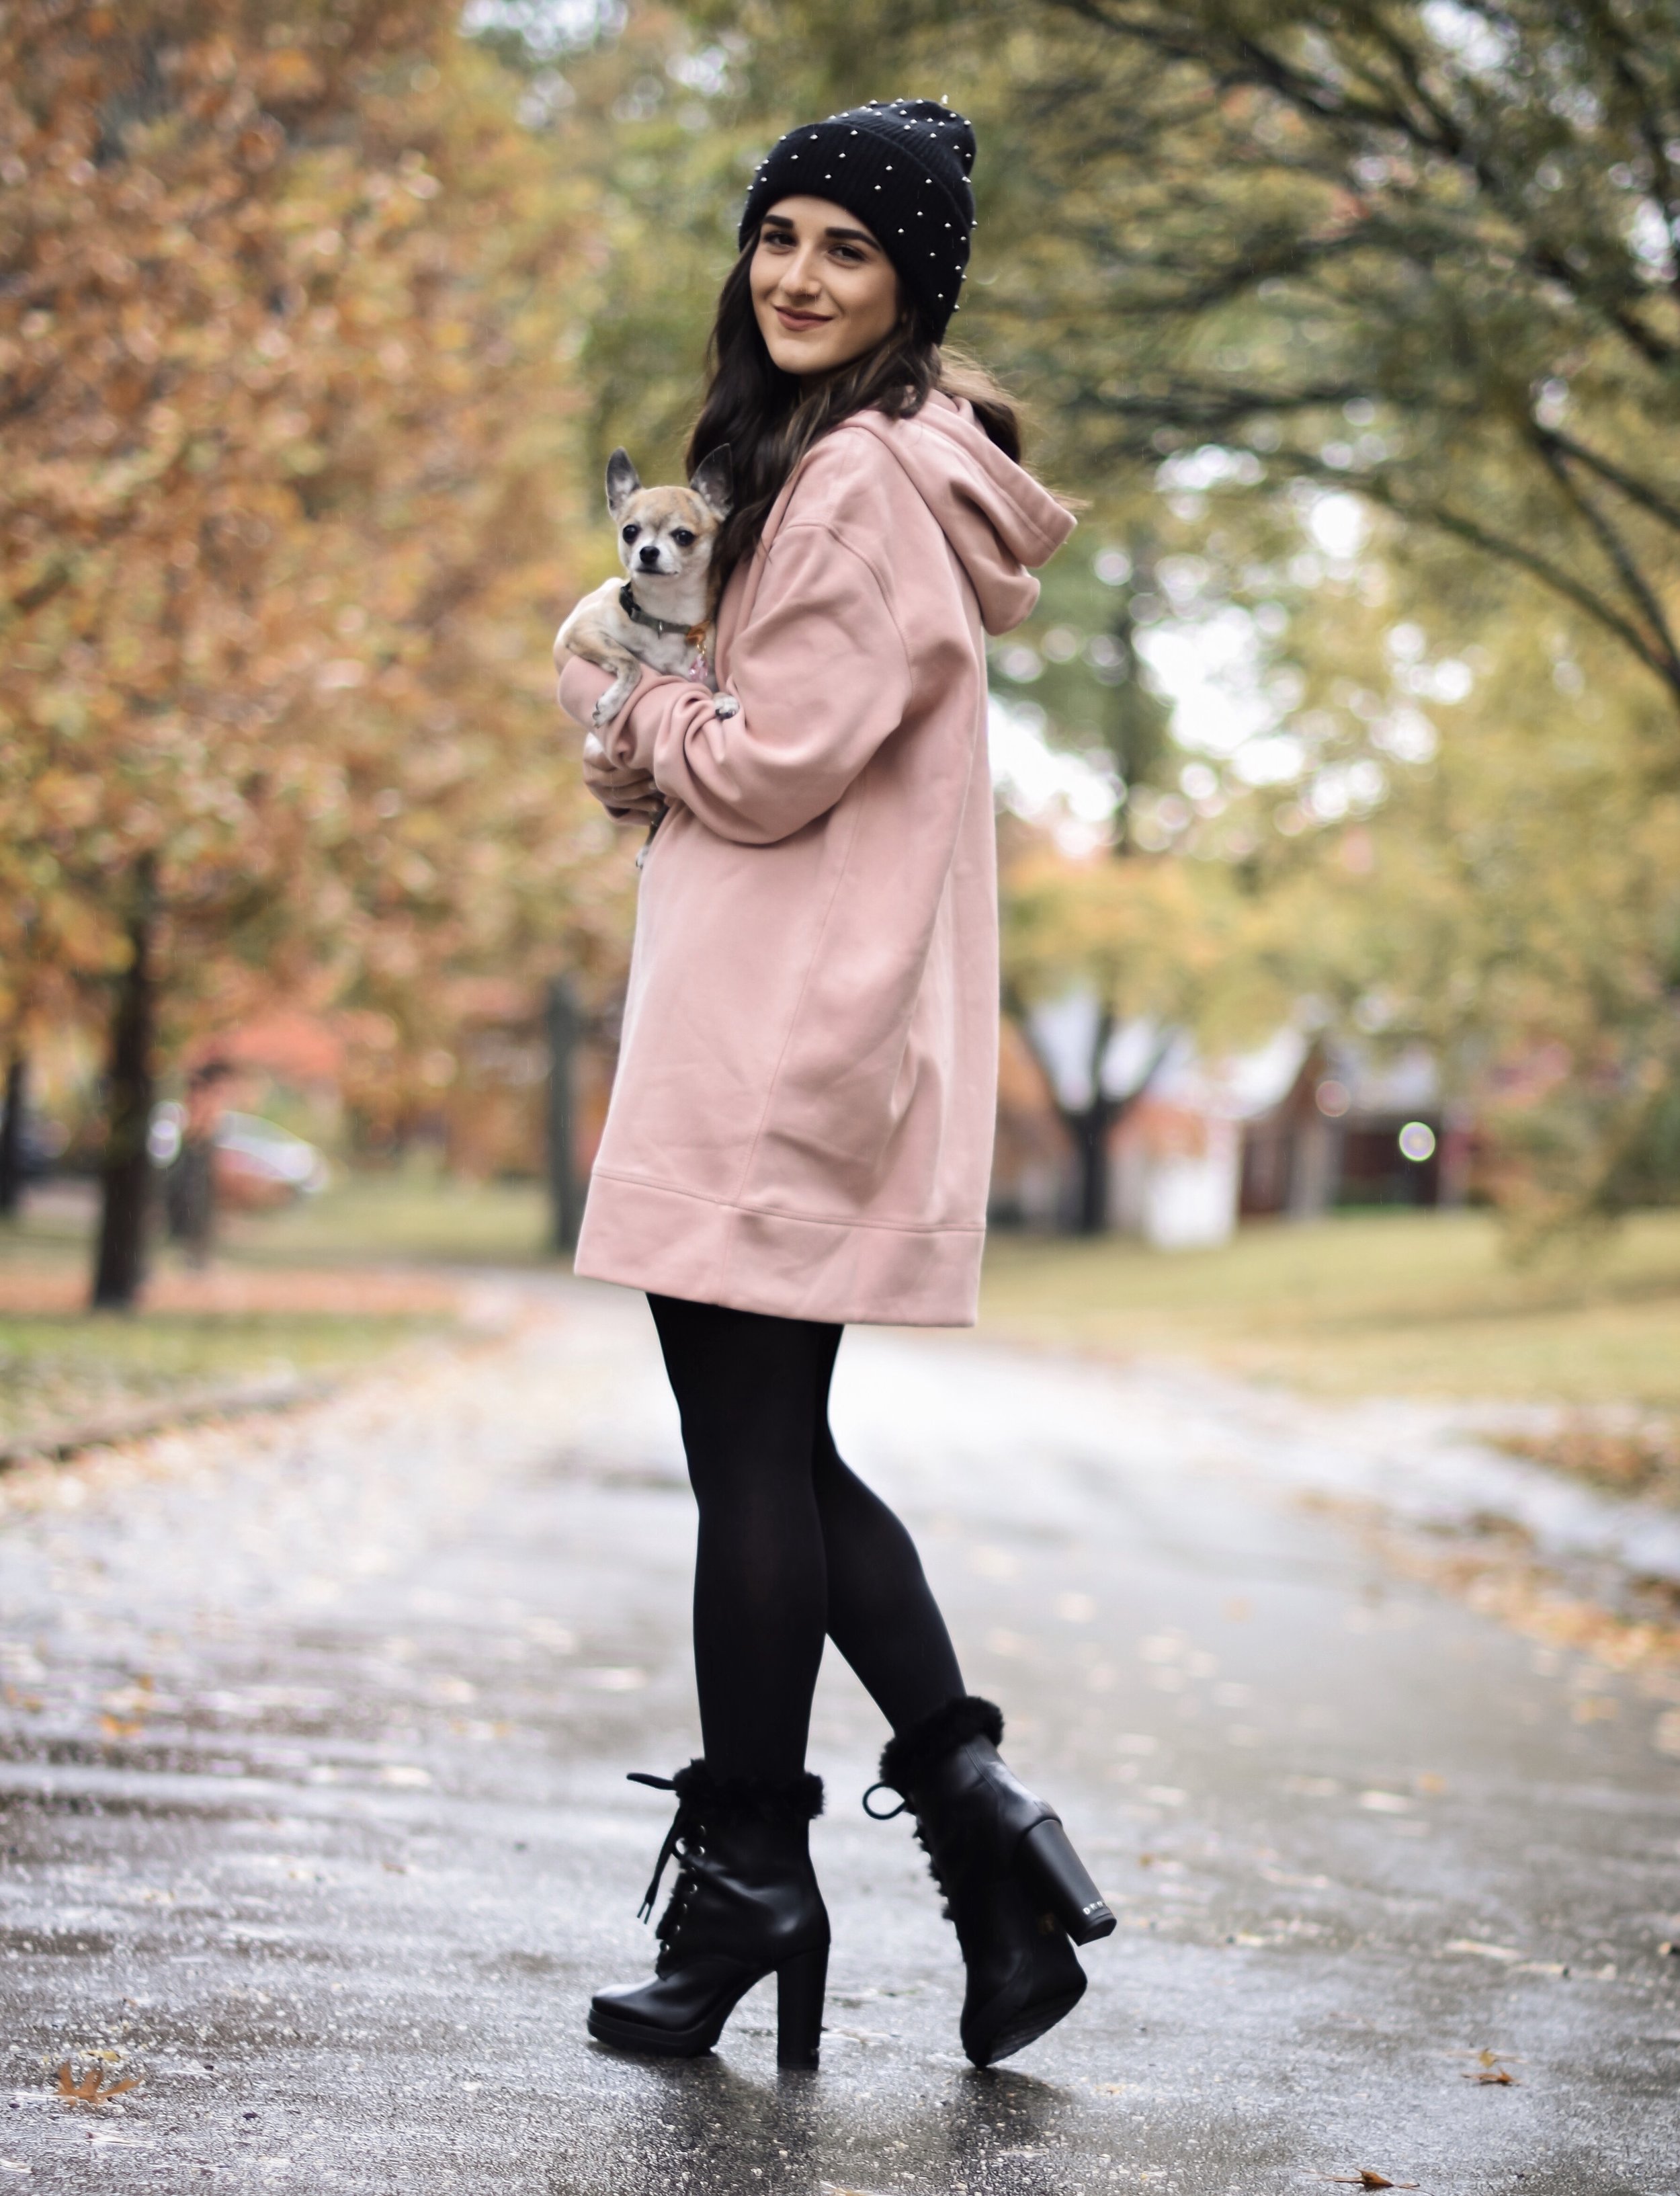 Getting Winter Ready With Macy's Esther Santer Fashion Blog NYC Street Style Blogger Outfit OOTD Trendy Chihuahua Pink Sweatshirt Dress Black Beanie Black Fur Booties Shoes Boots Fall  Winter Outfit Tights Beautiful H&M Shop Cute Puppy Dog Inspiration.jpg